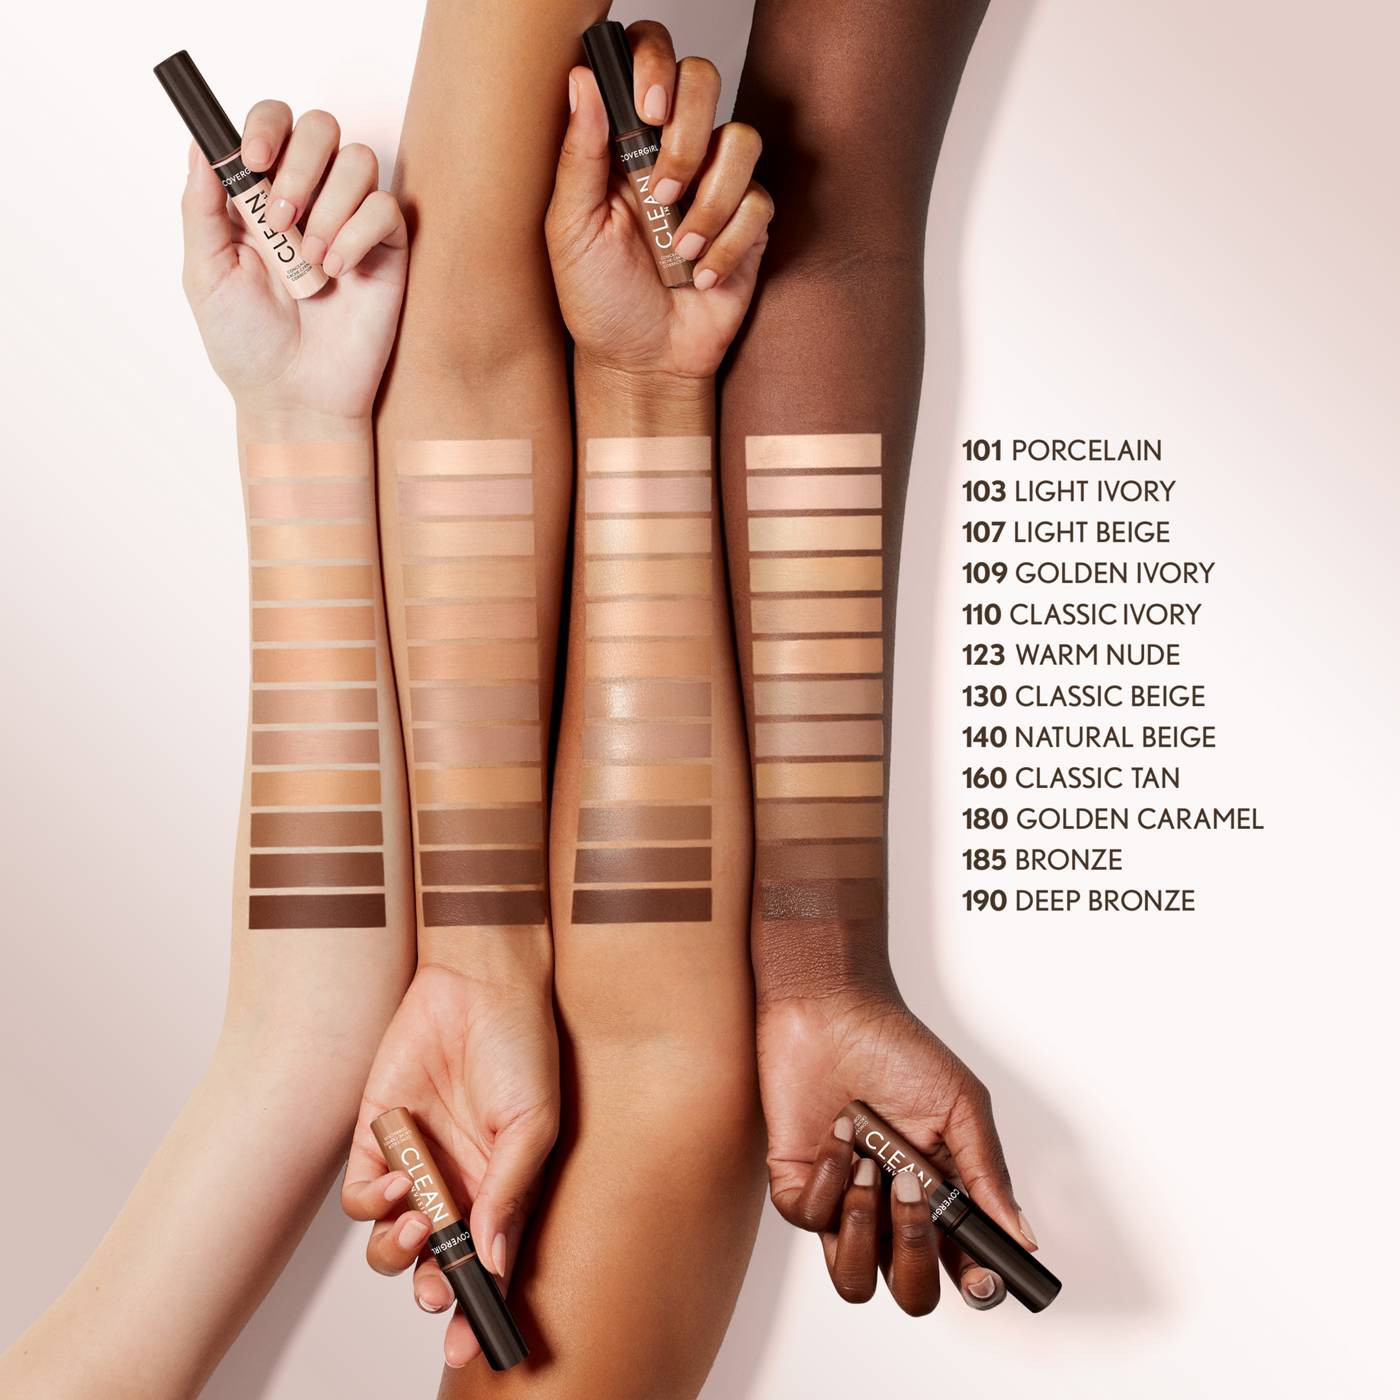 Covergirl Clean Invisible Concealer - Warm Nude; image 6 of 15